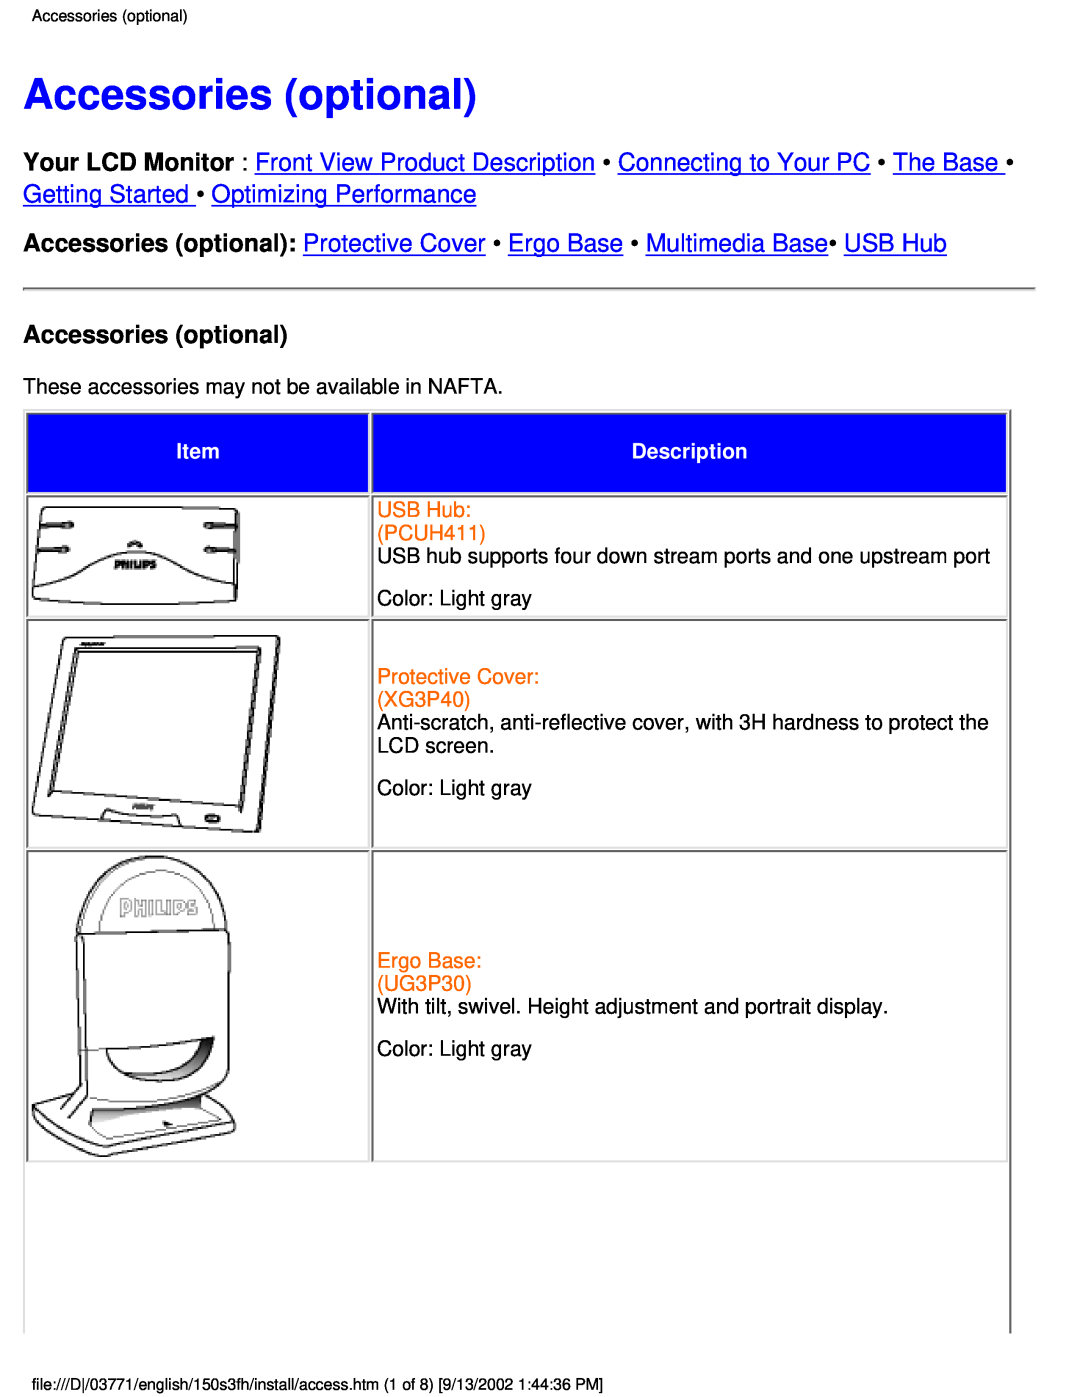 Philips 150S3H user manual Accessories optional 